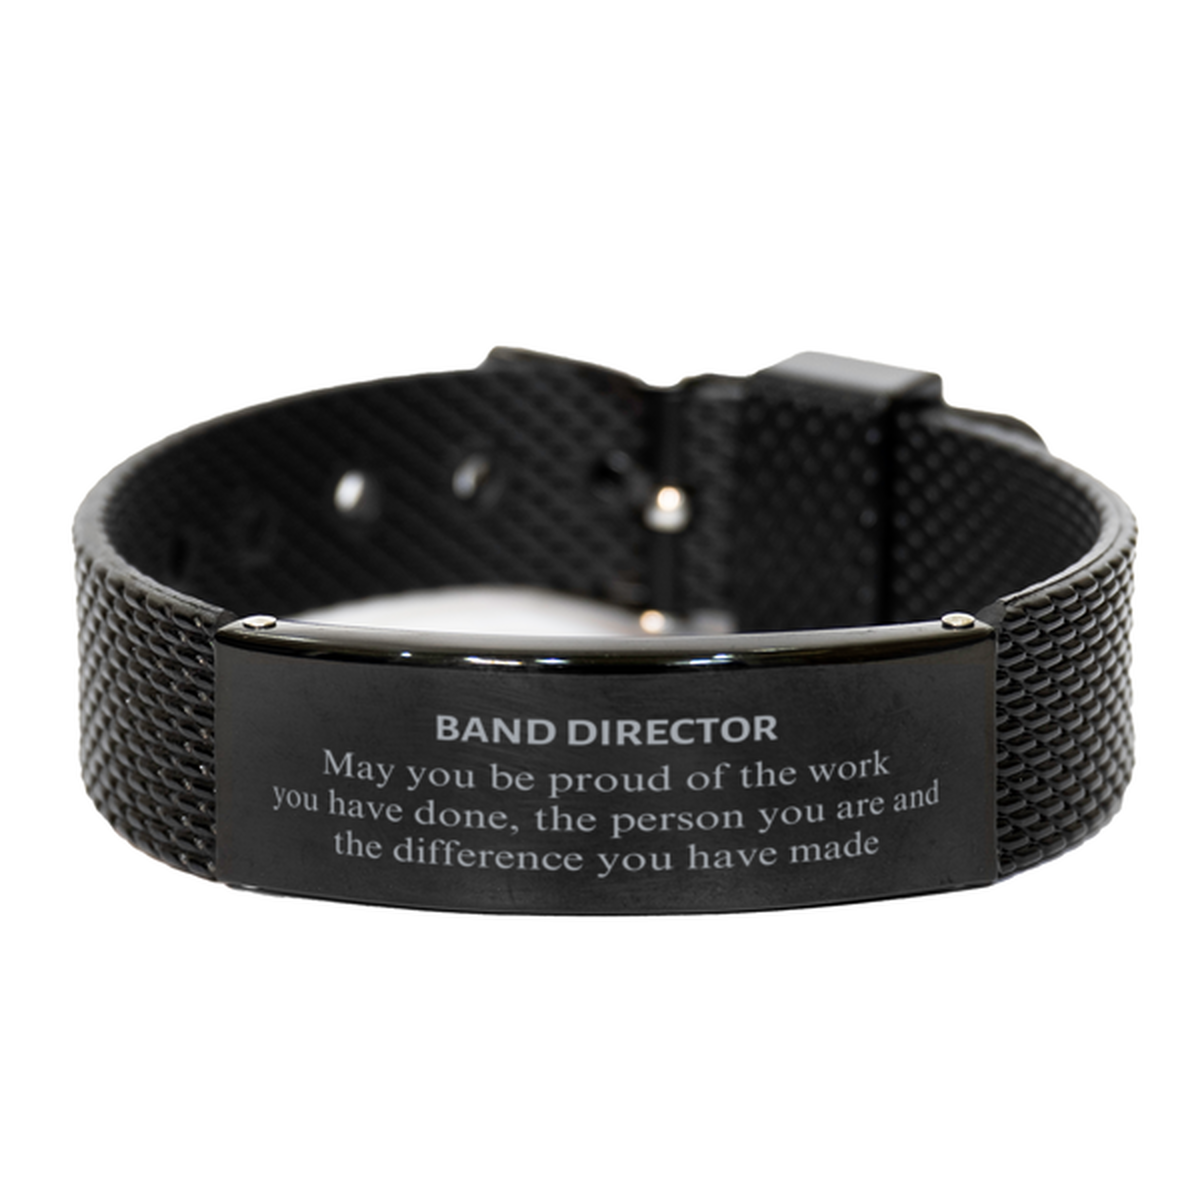 Band Director May you be proud of the work you have done, Retirement Band Director Black Shark Mesh Bracelet for Colleague Appreciation Gifts Amazing for Band Director